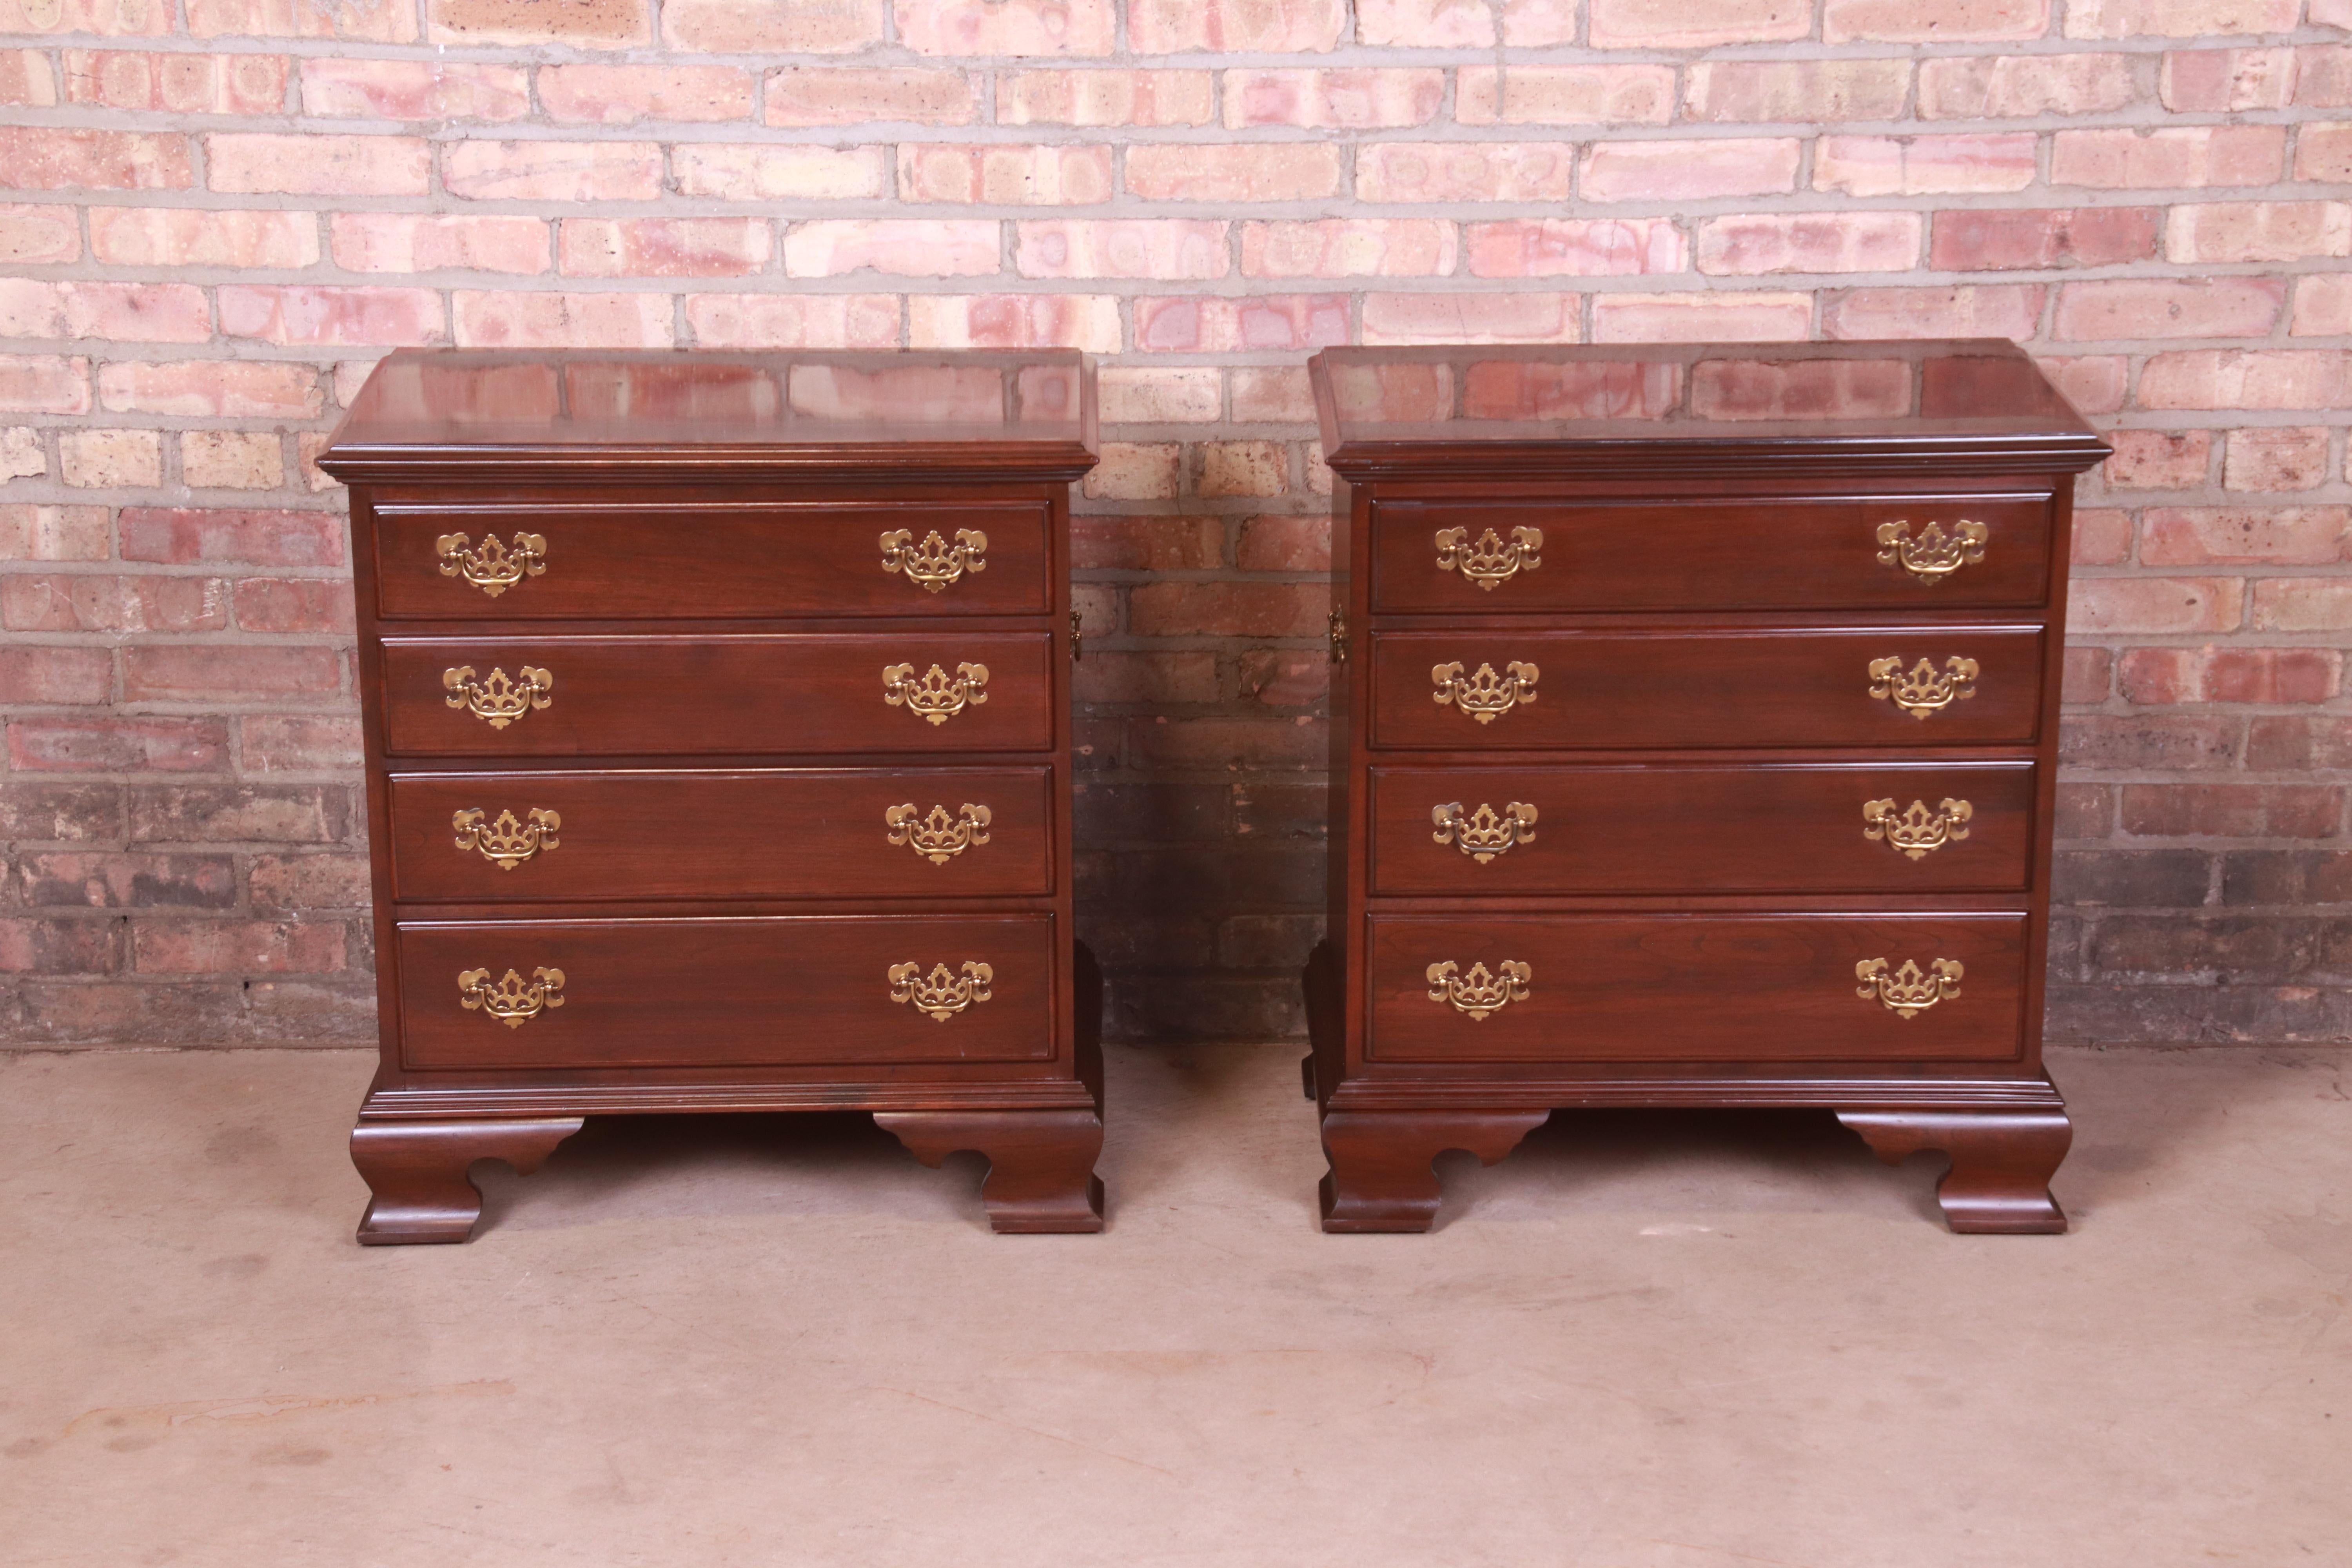 A gorgeous pair of Georgian or Chippendale style bachelor chests or nightstands

By Ethan Allen, 